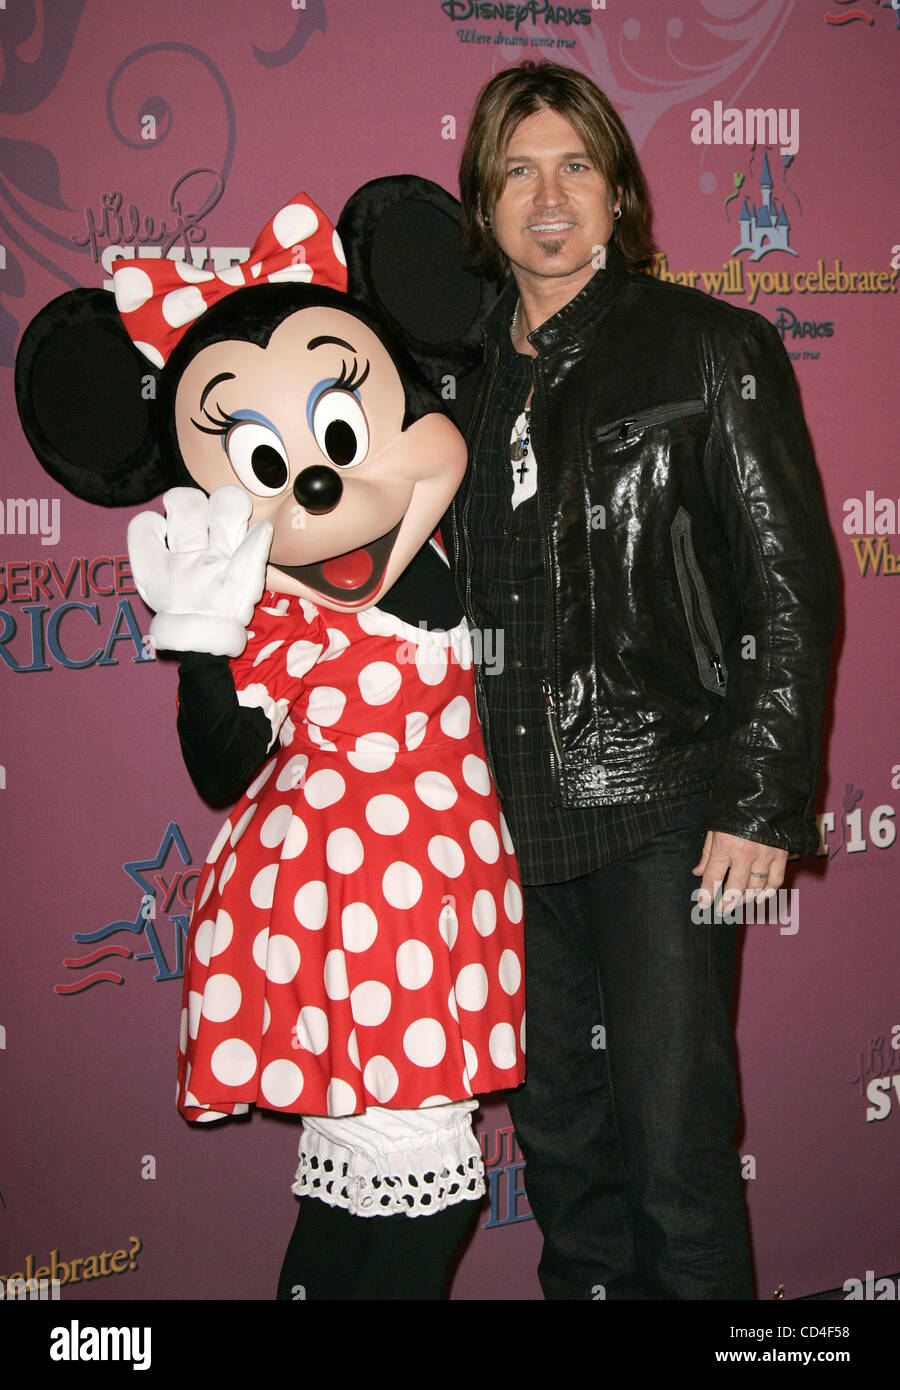 Oct 05, 2008 - Anaheim, California, USA - Country music singer, songwriter and actor BILLY RAY CYRUS with MINNIE MOUSE at the Miley Cyrus Sweet 16 Birthday Party held at Disneyland in Anaheim. (Credit Image: © Lisa O'Connor/ZUMA Press) Stock Photo